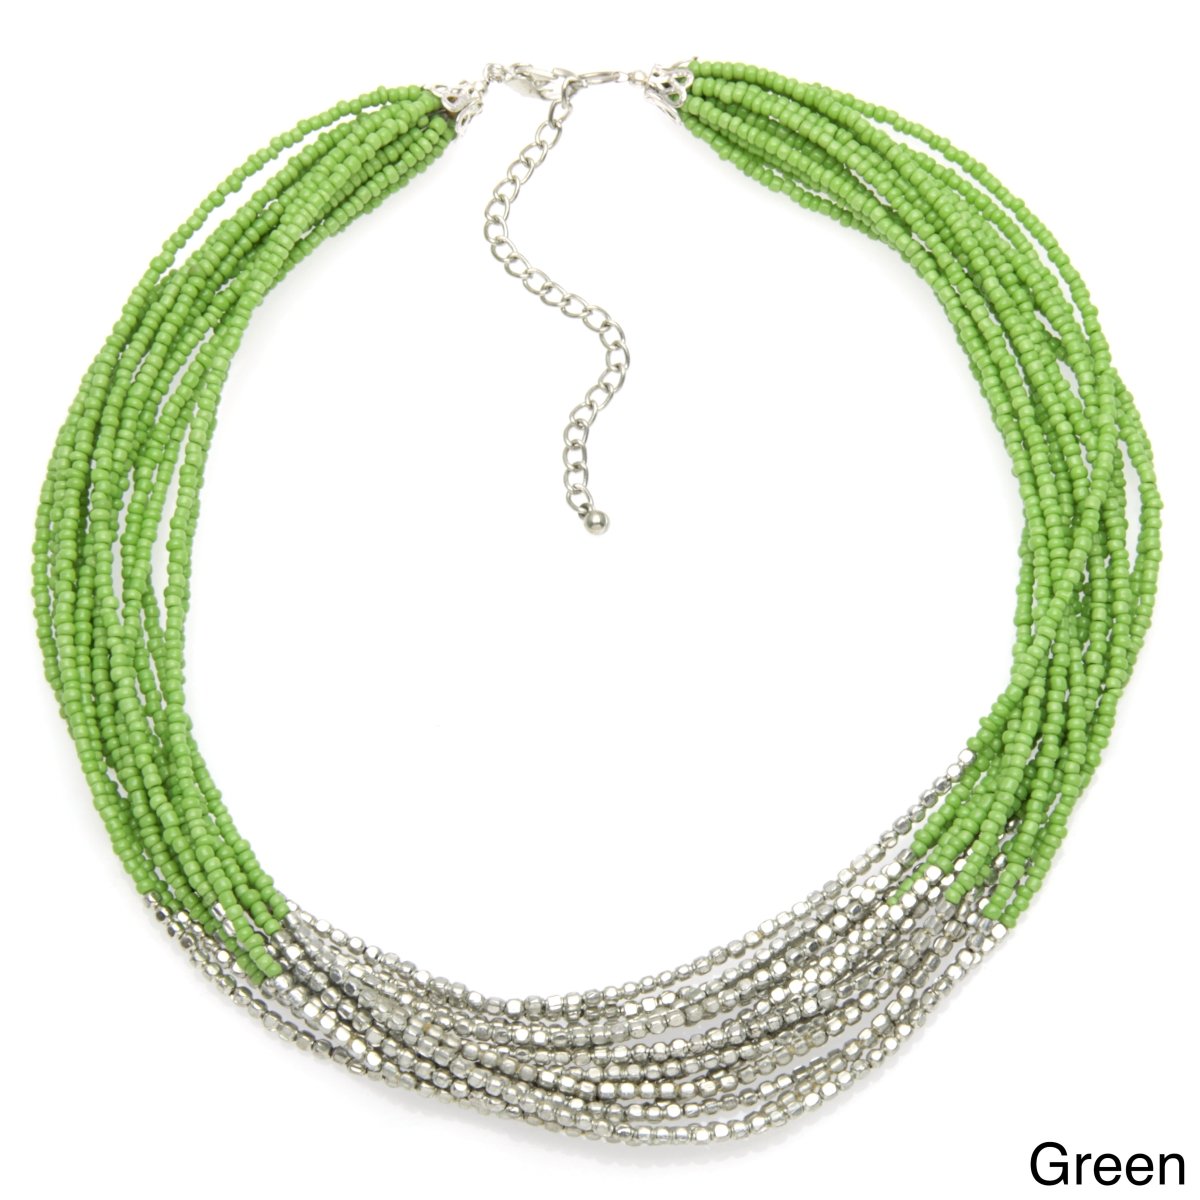 Picture of J&H Designs 7422-N-Green Mutli-strand Seed Bead Necklace